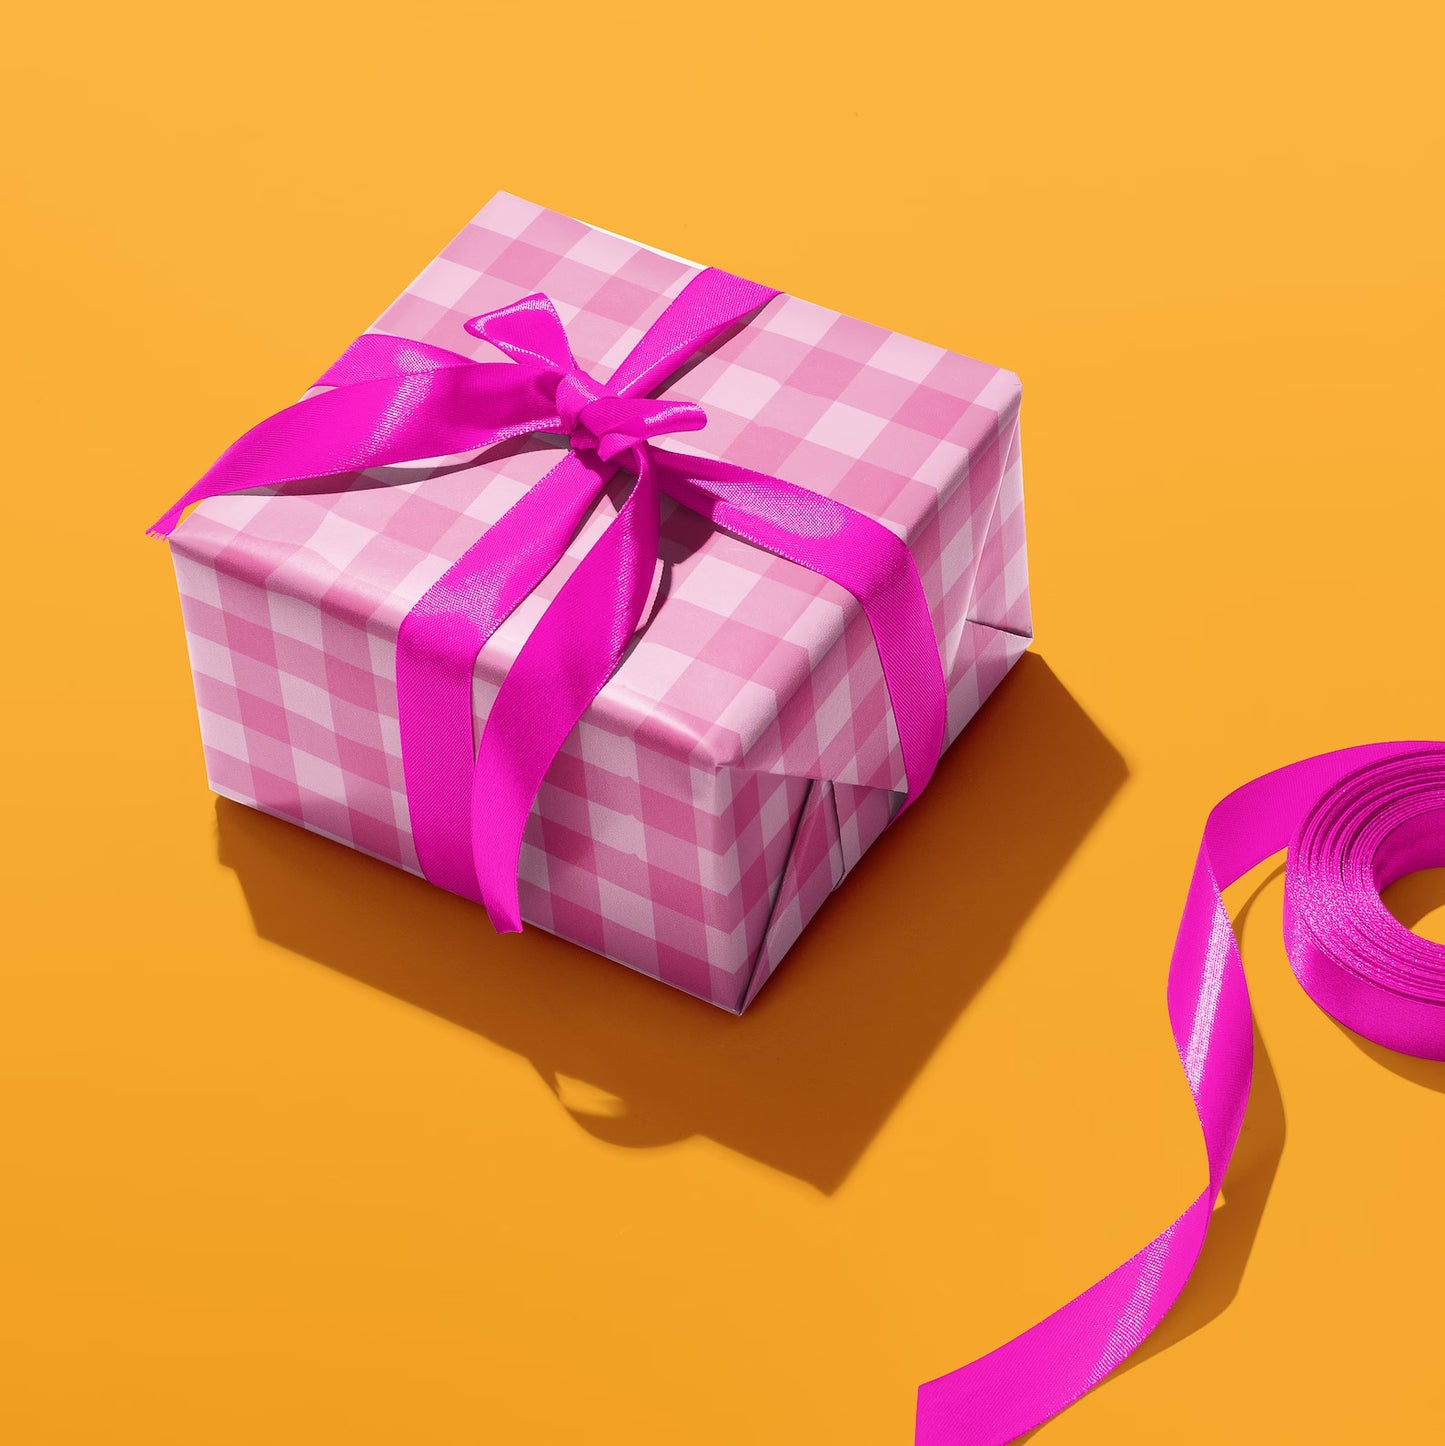 Sprinkle Club - A present wrapped in pink gingham print wrapping paper with a hot pink bow